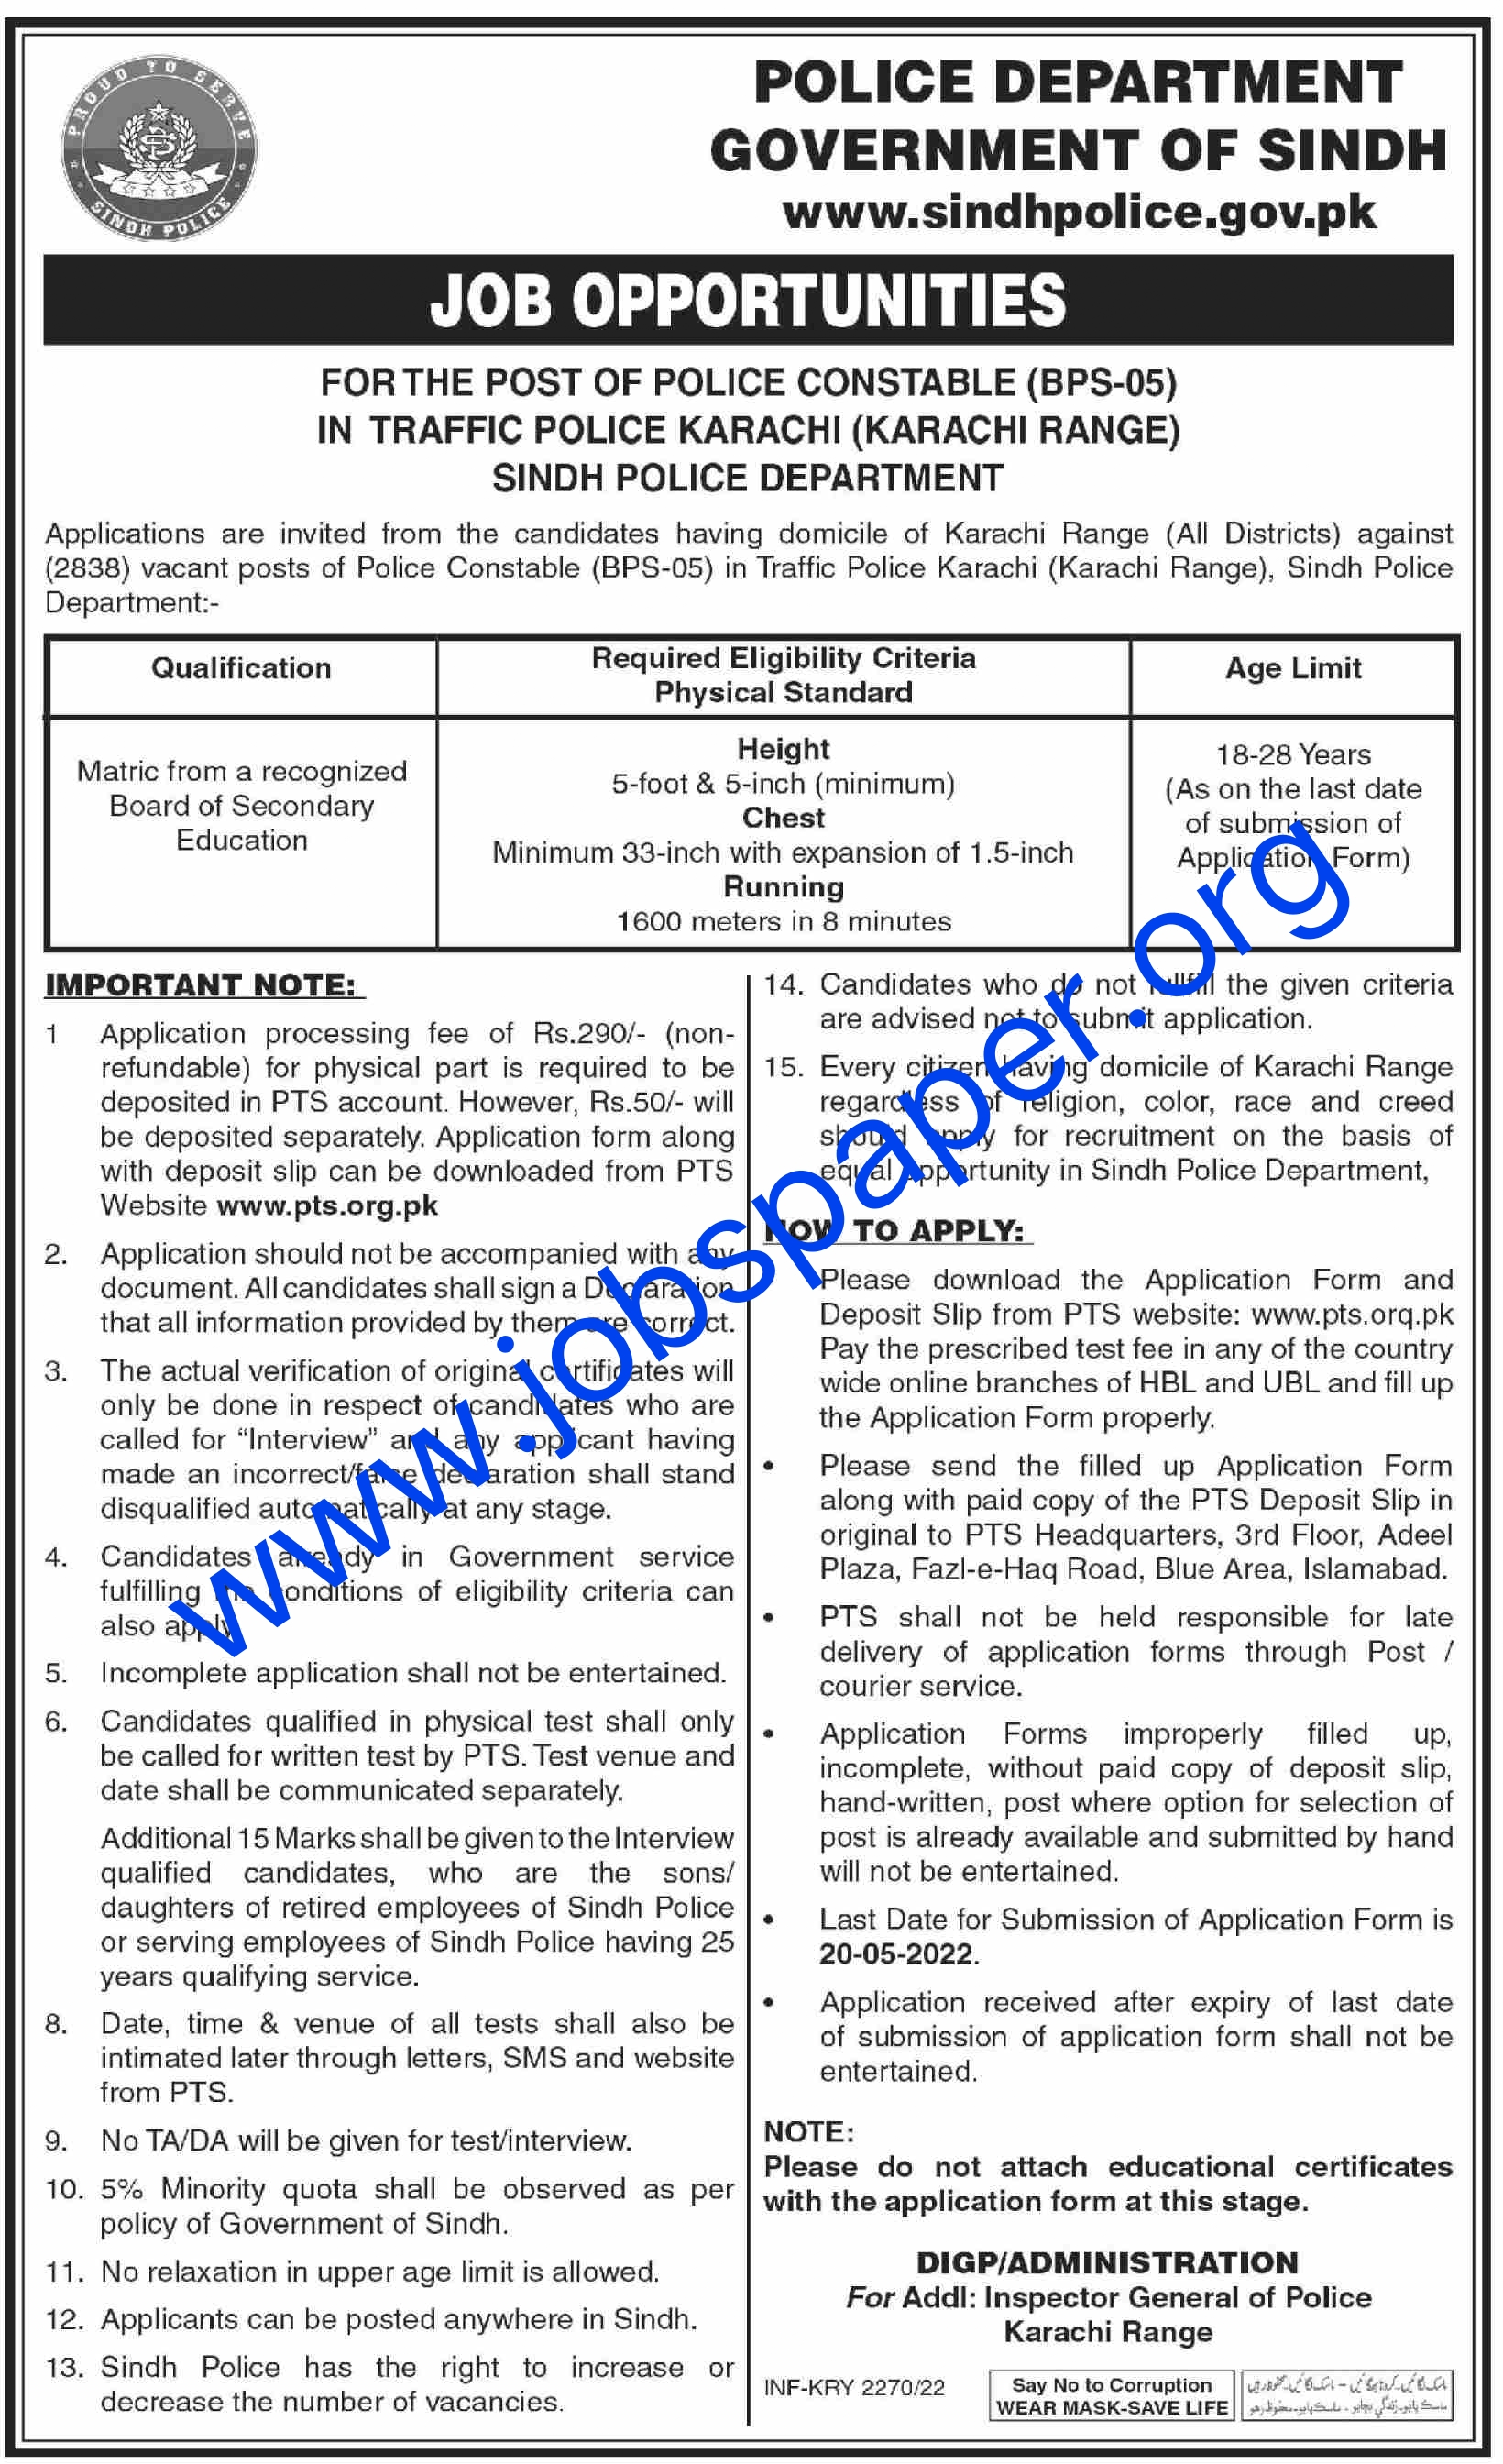 Sindh Police Jobs 2022,police jobs,sindh police jobs karachi,sindh police jobs hydrabad,sindh police lady jobs,government jobs,Jobs daily,sindh jobs,today jobs,daily jobs,All jobs in sindh,army jobs,navy jobs,